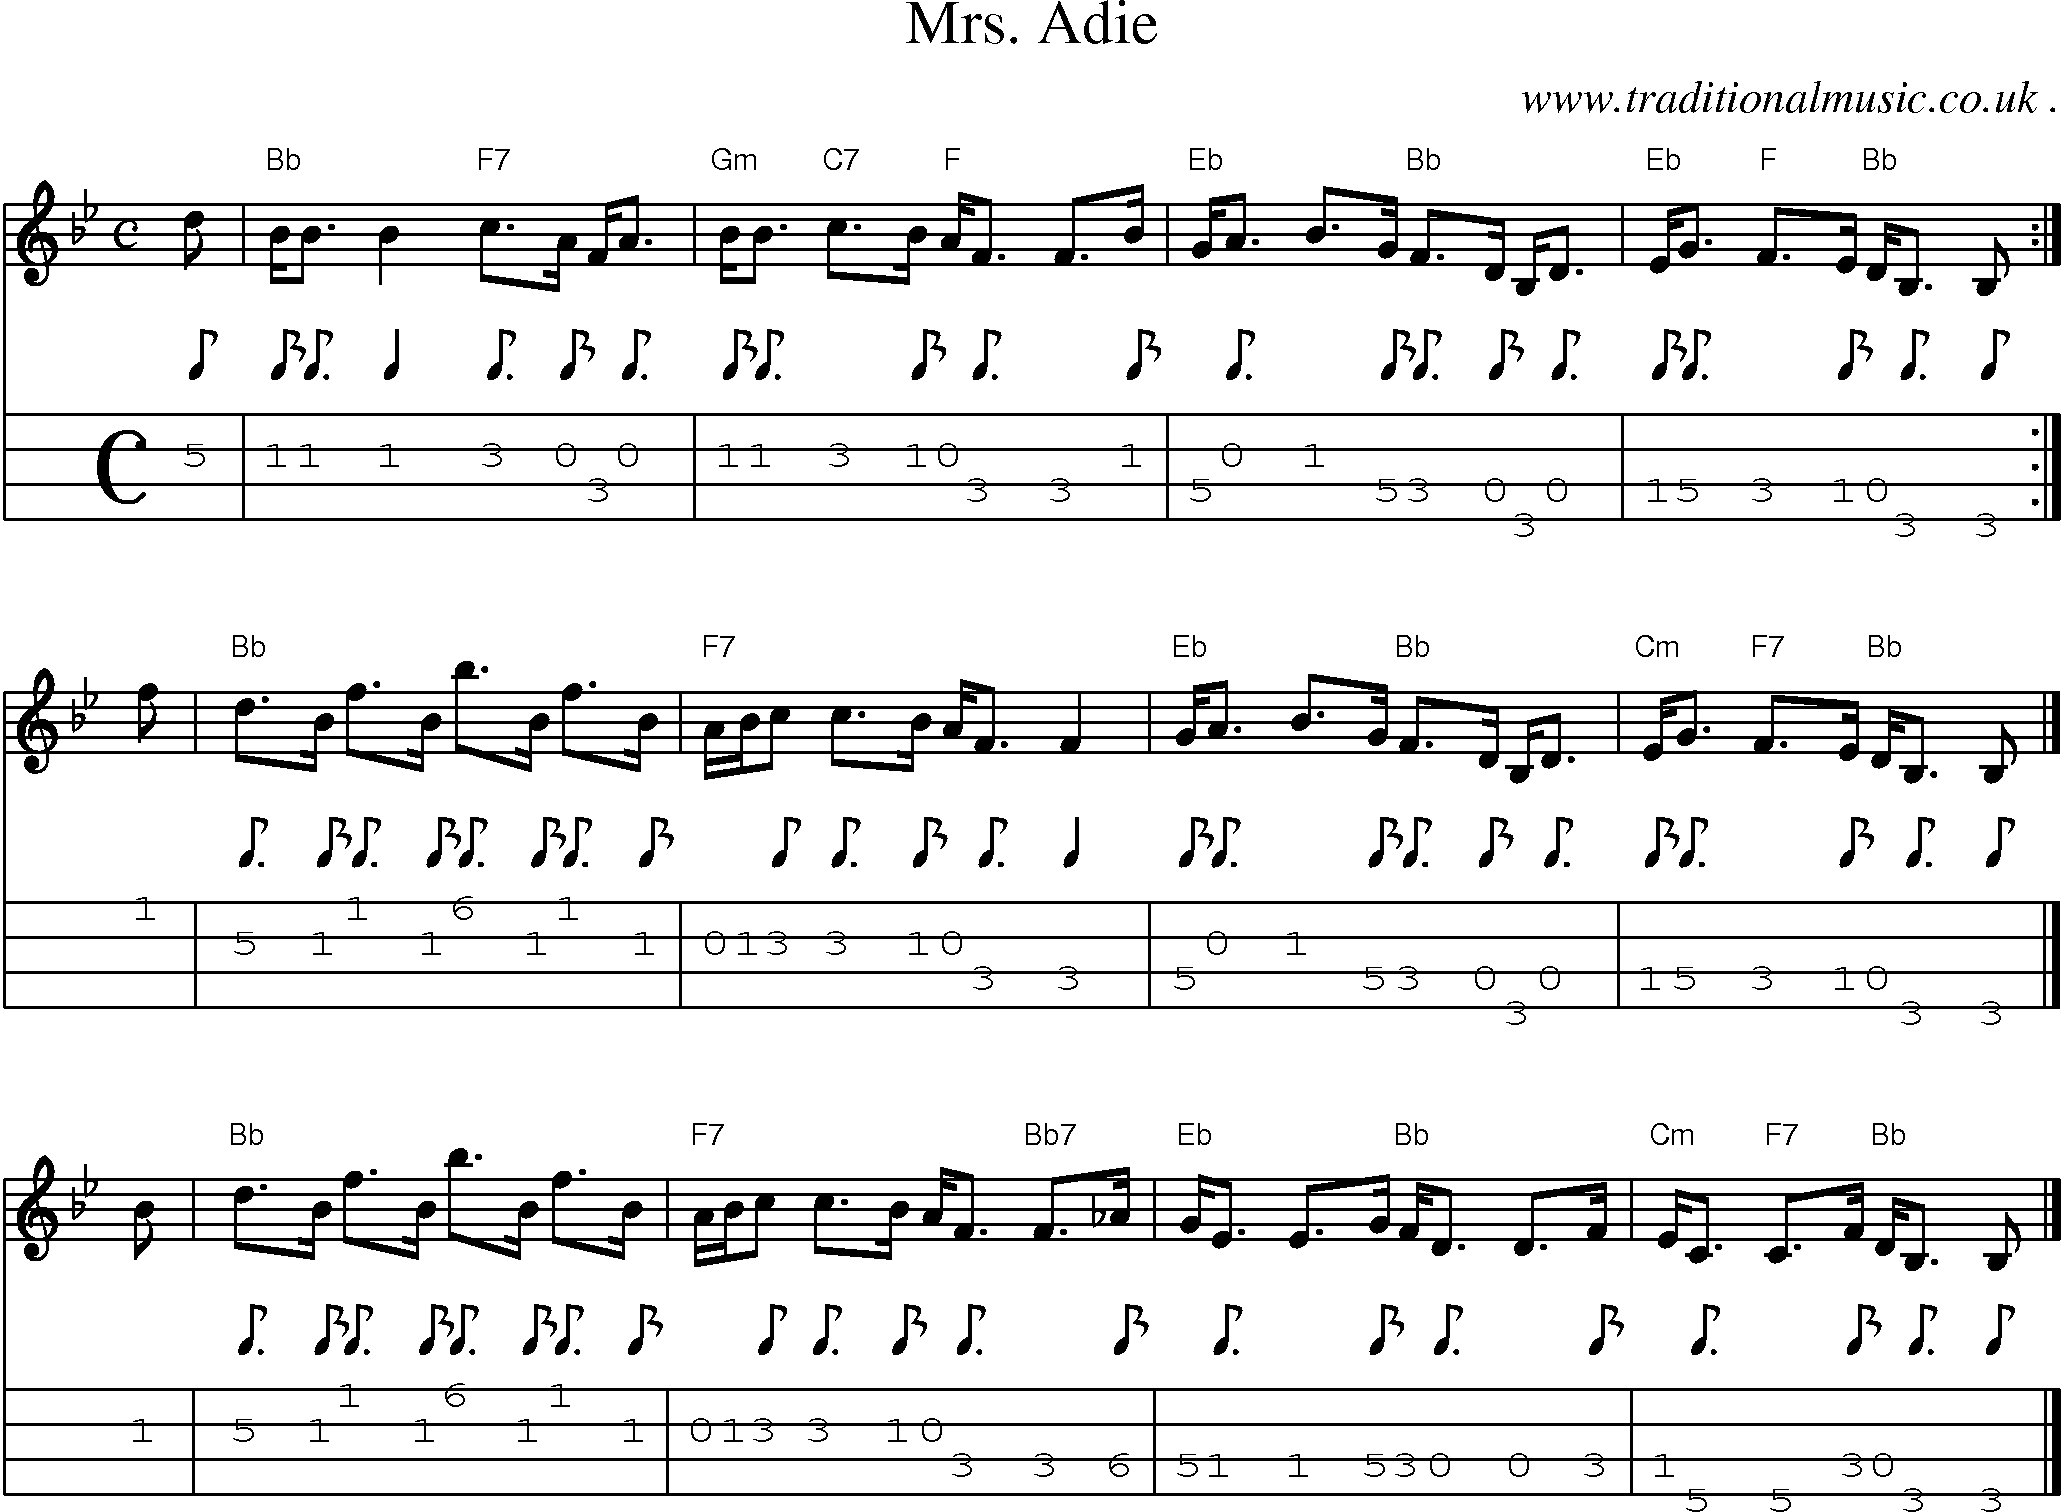 Sheet-music  score, Chords and Mandolin Tabs for Mrs Adie